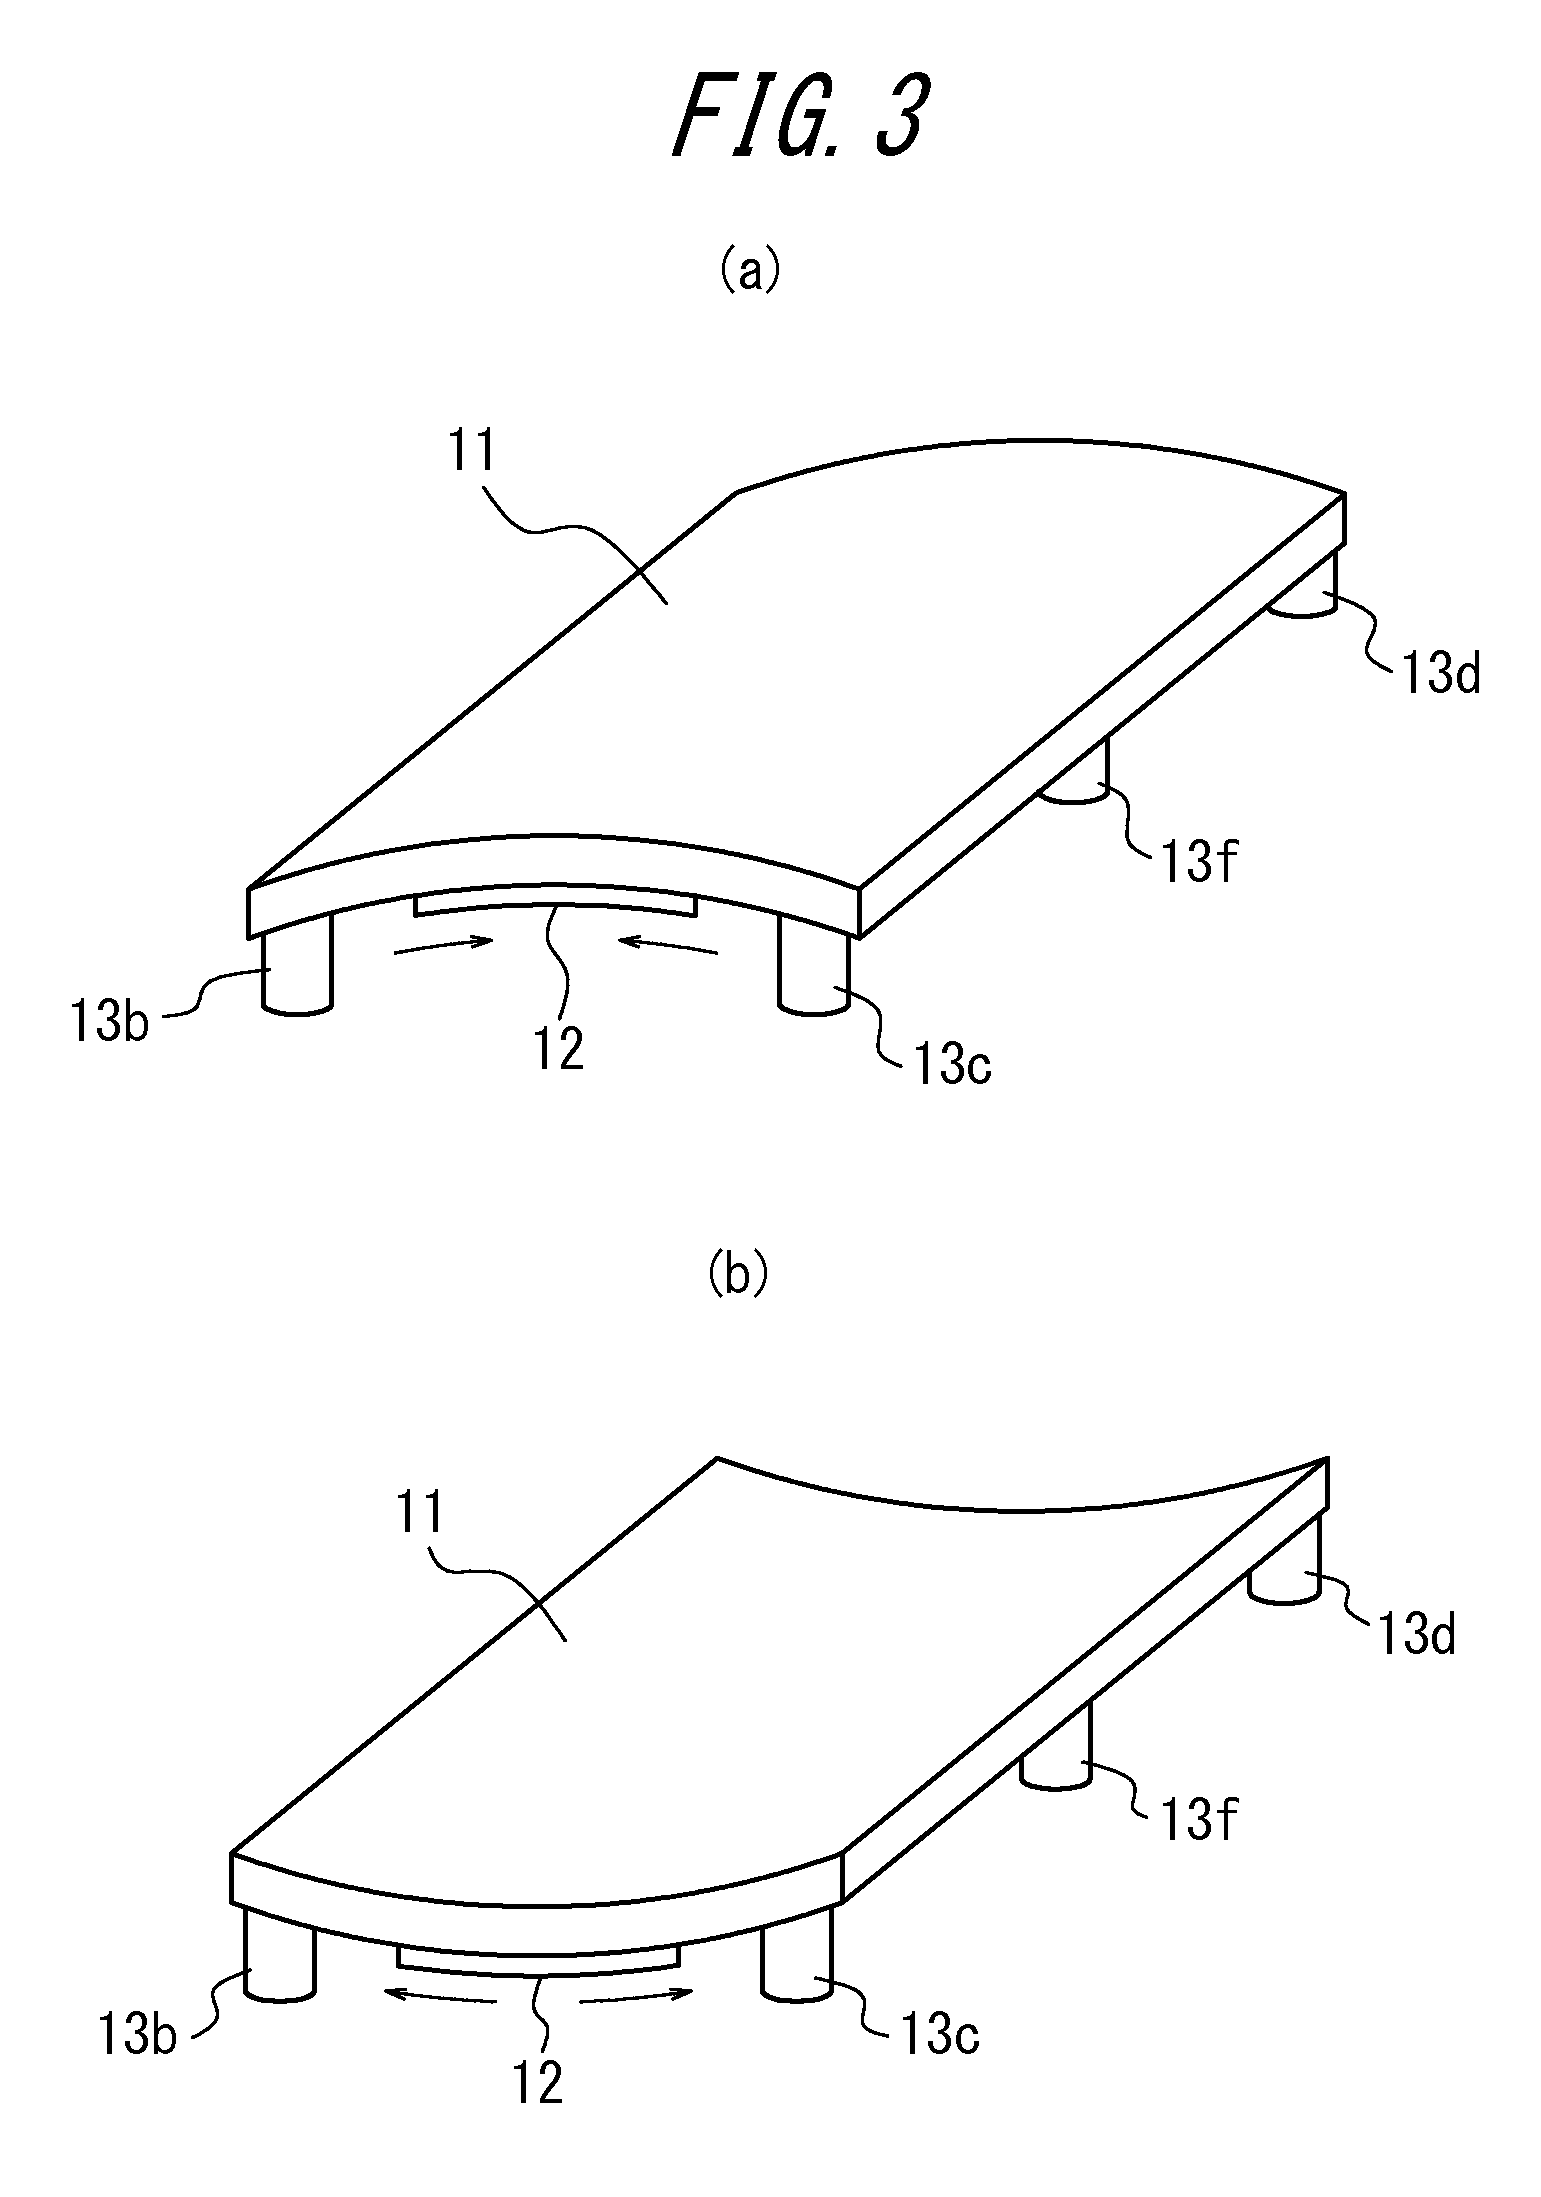 Touch panel apparatus with piezoelectric element